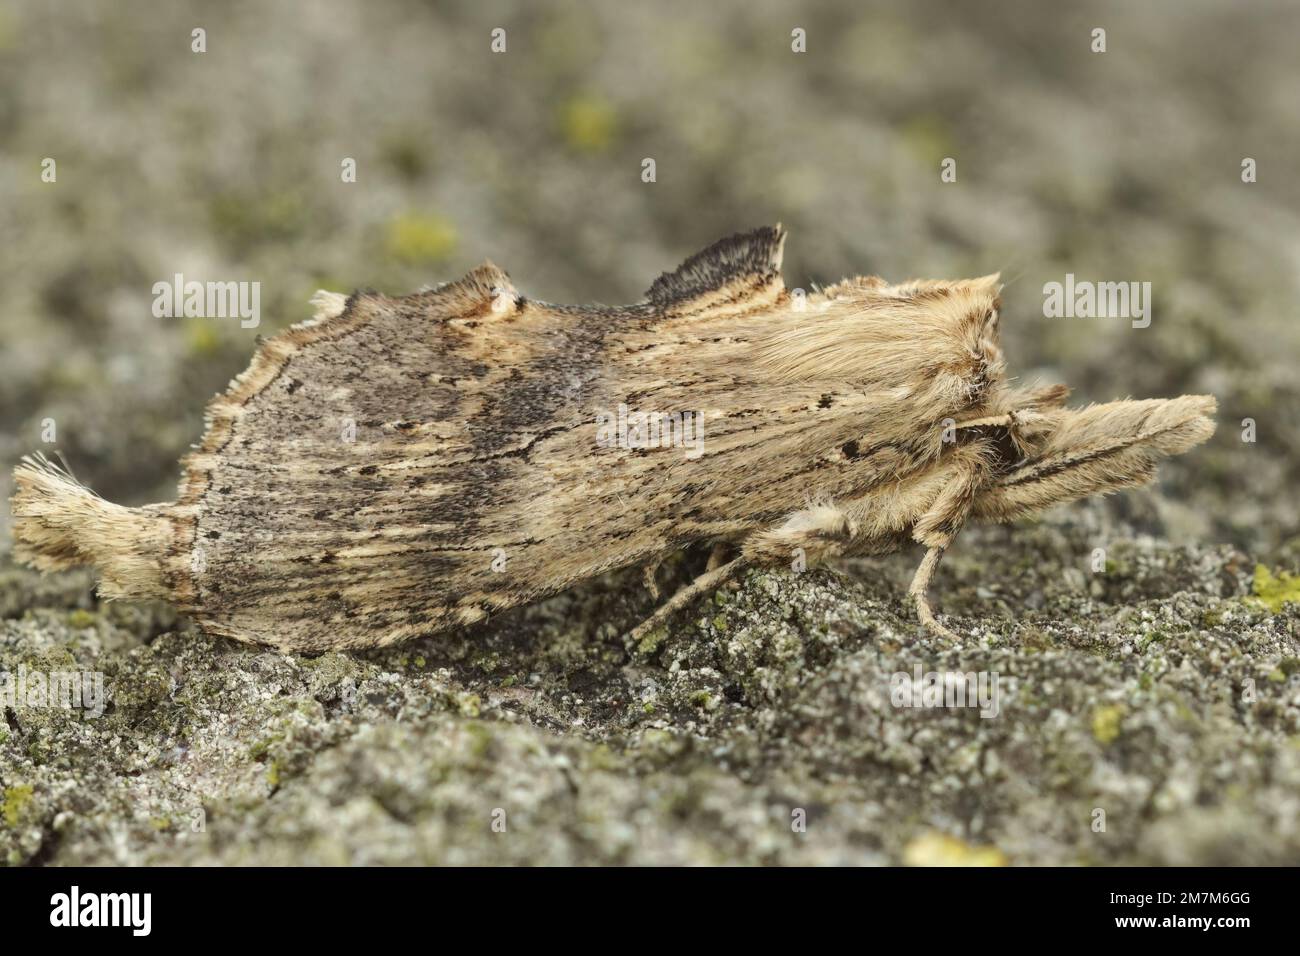 Natural closeup on the pale prominent moth, Pterostoma palpina sitting on wood in the garden Stock Photo